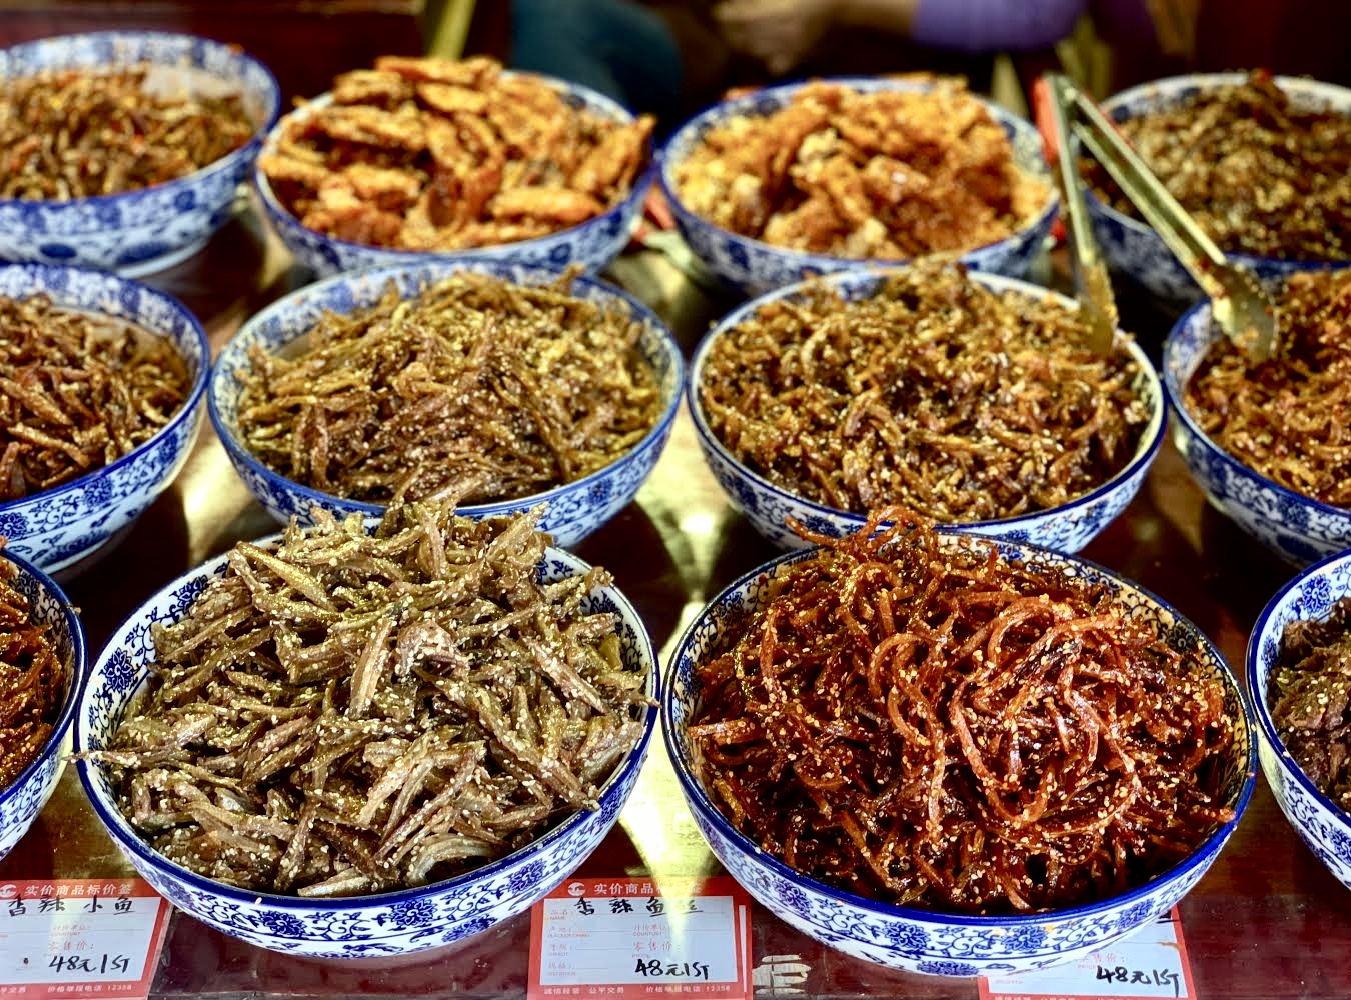 Food from an open market in China